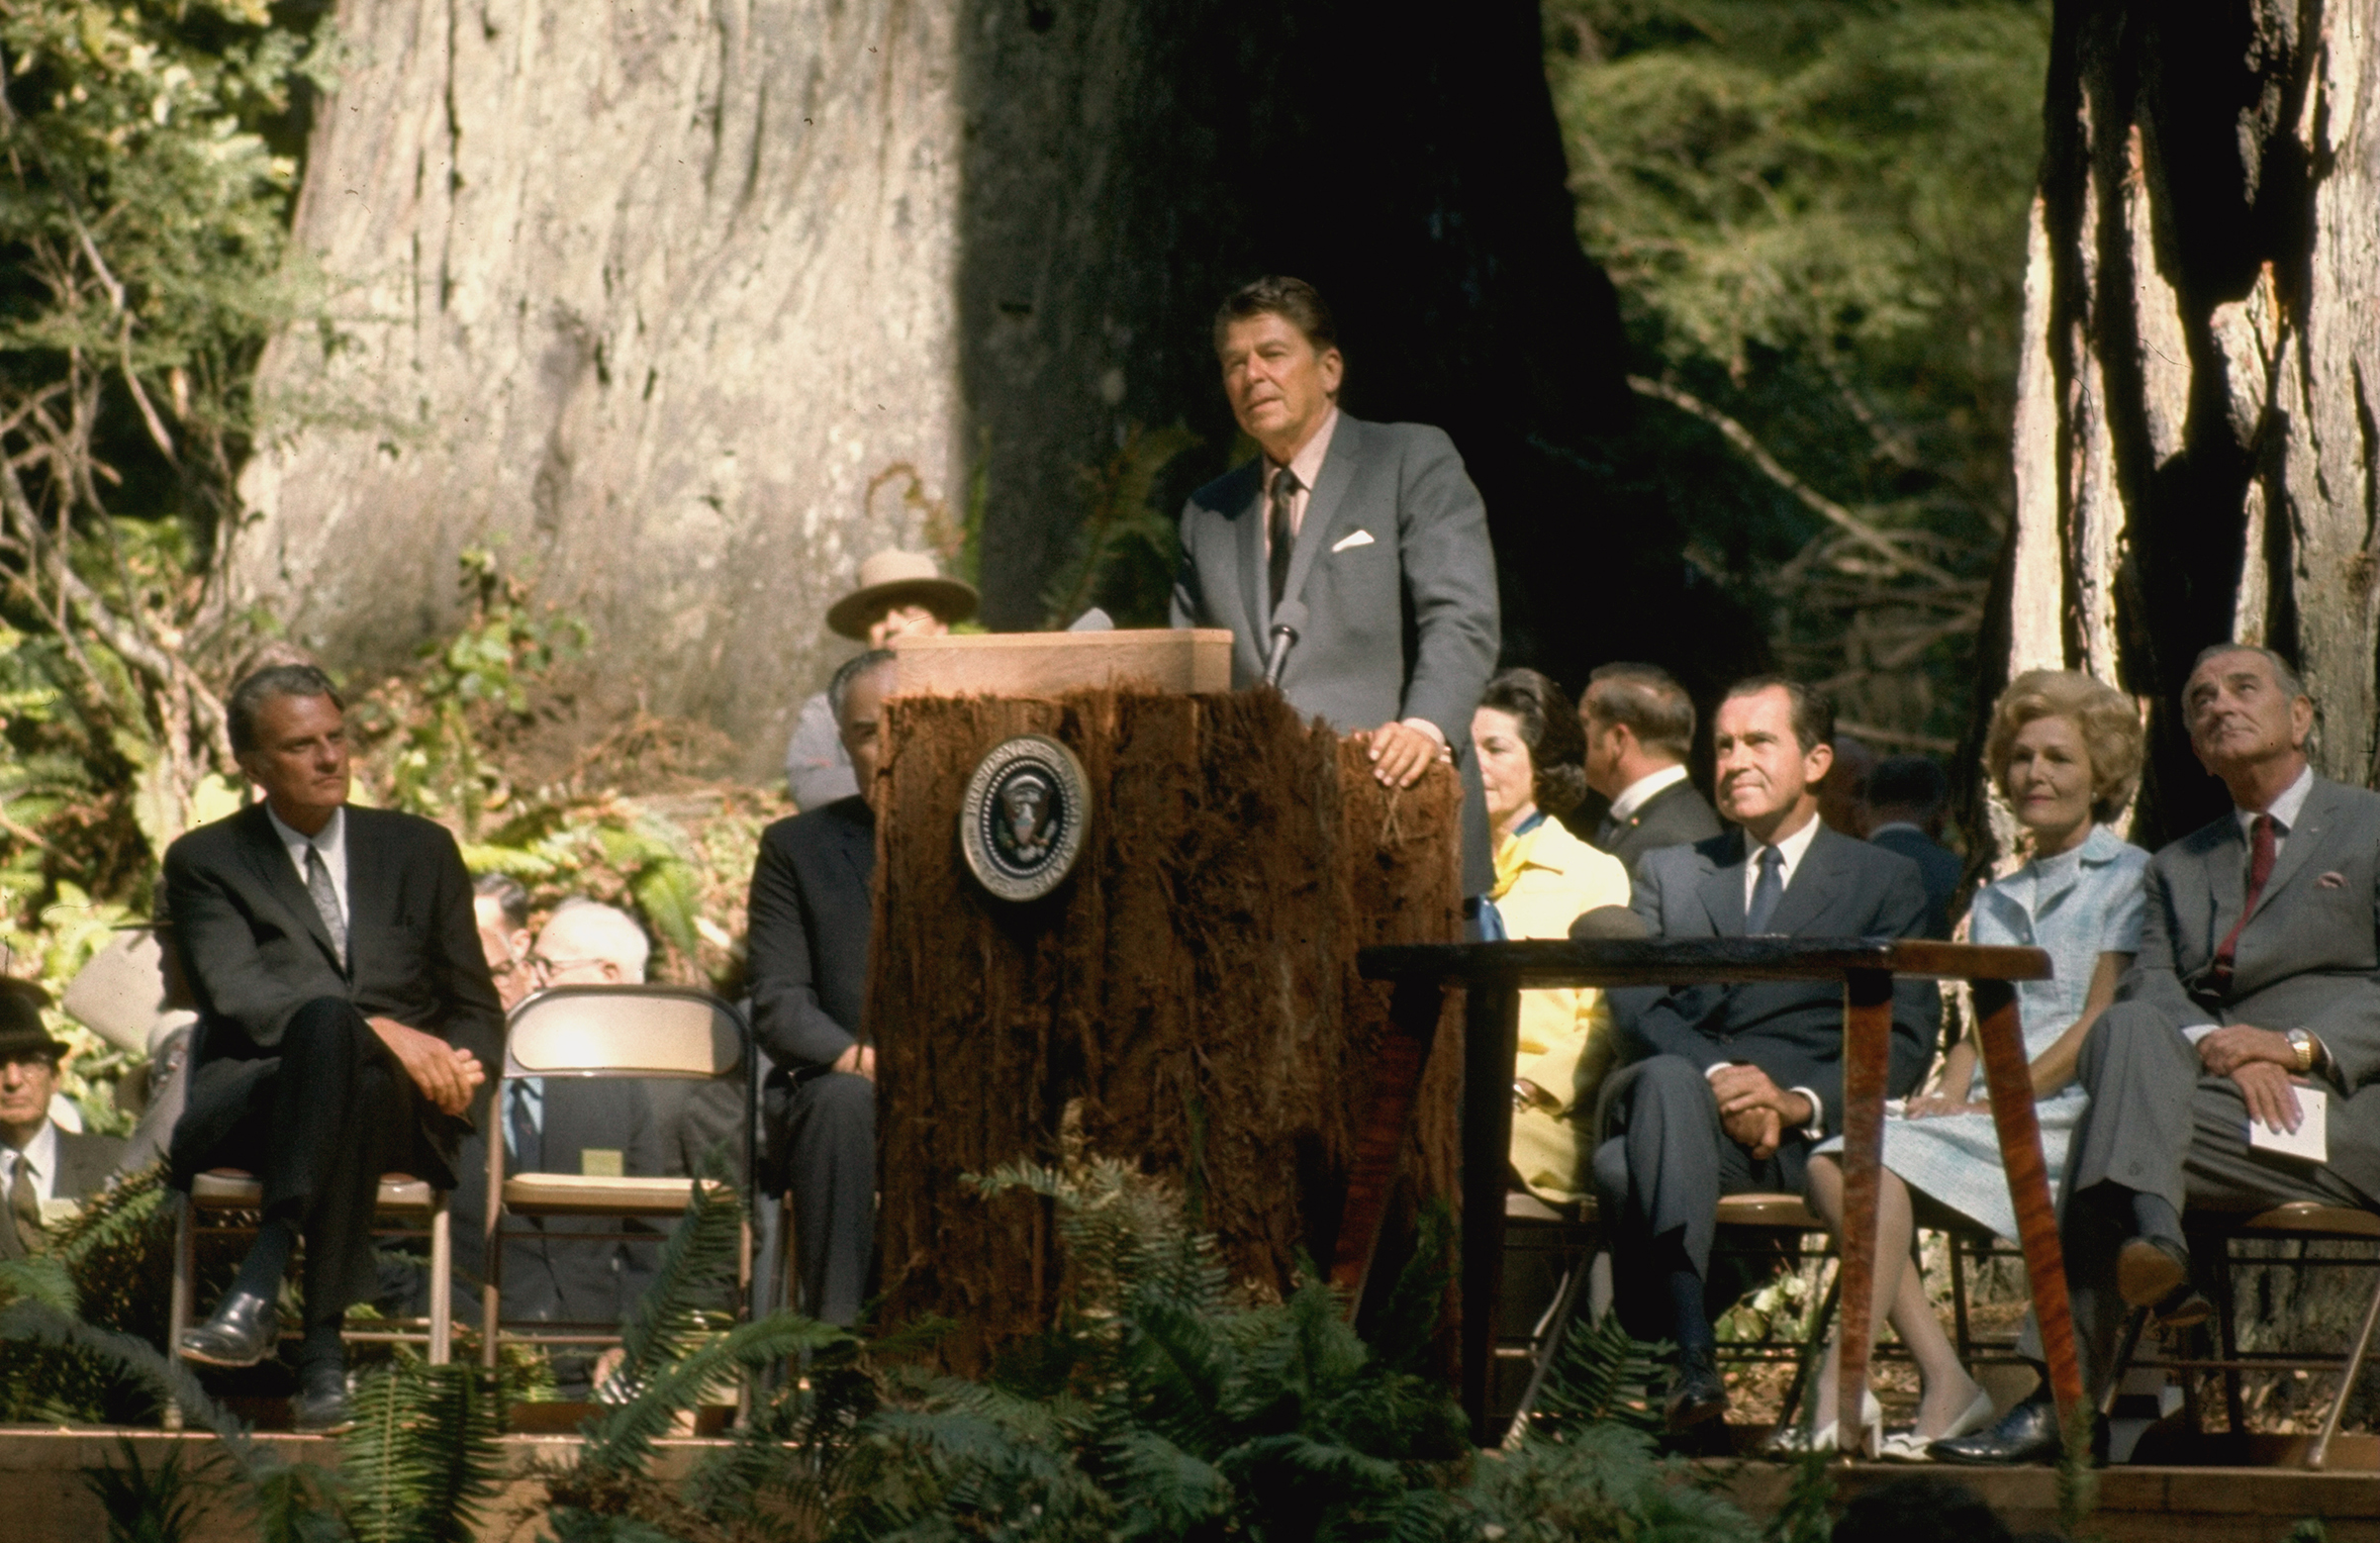 California Governor Ronald Reagan speaking while standing at podium as Reverend Billy Graham, Richard Nixon and wife Pat and Lyndon Johnson look on at Redwood National Park. (Julian Wasser—The LIFE Images Collection/Getty Images)